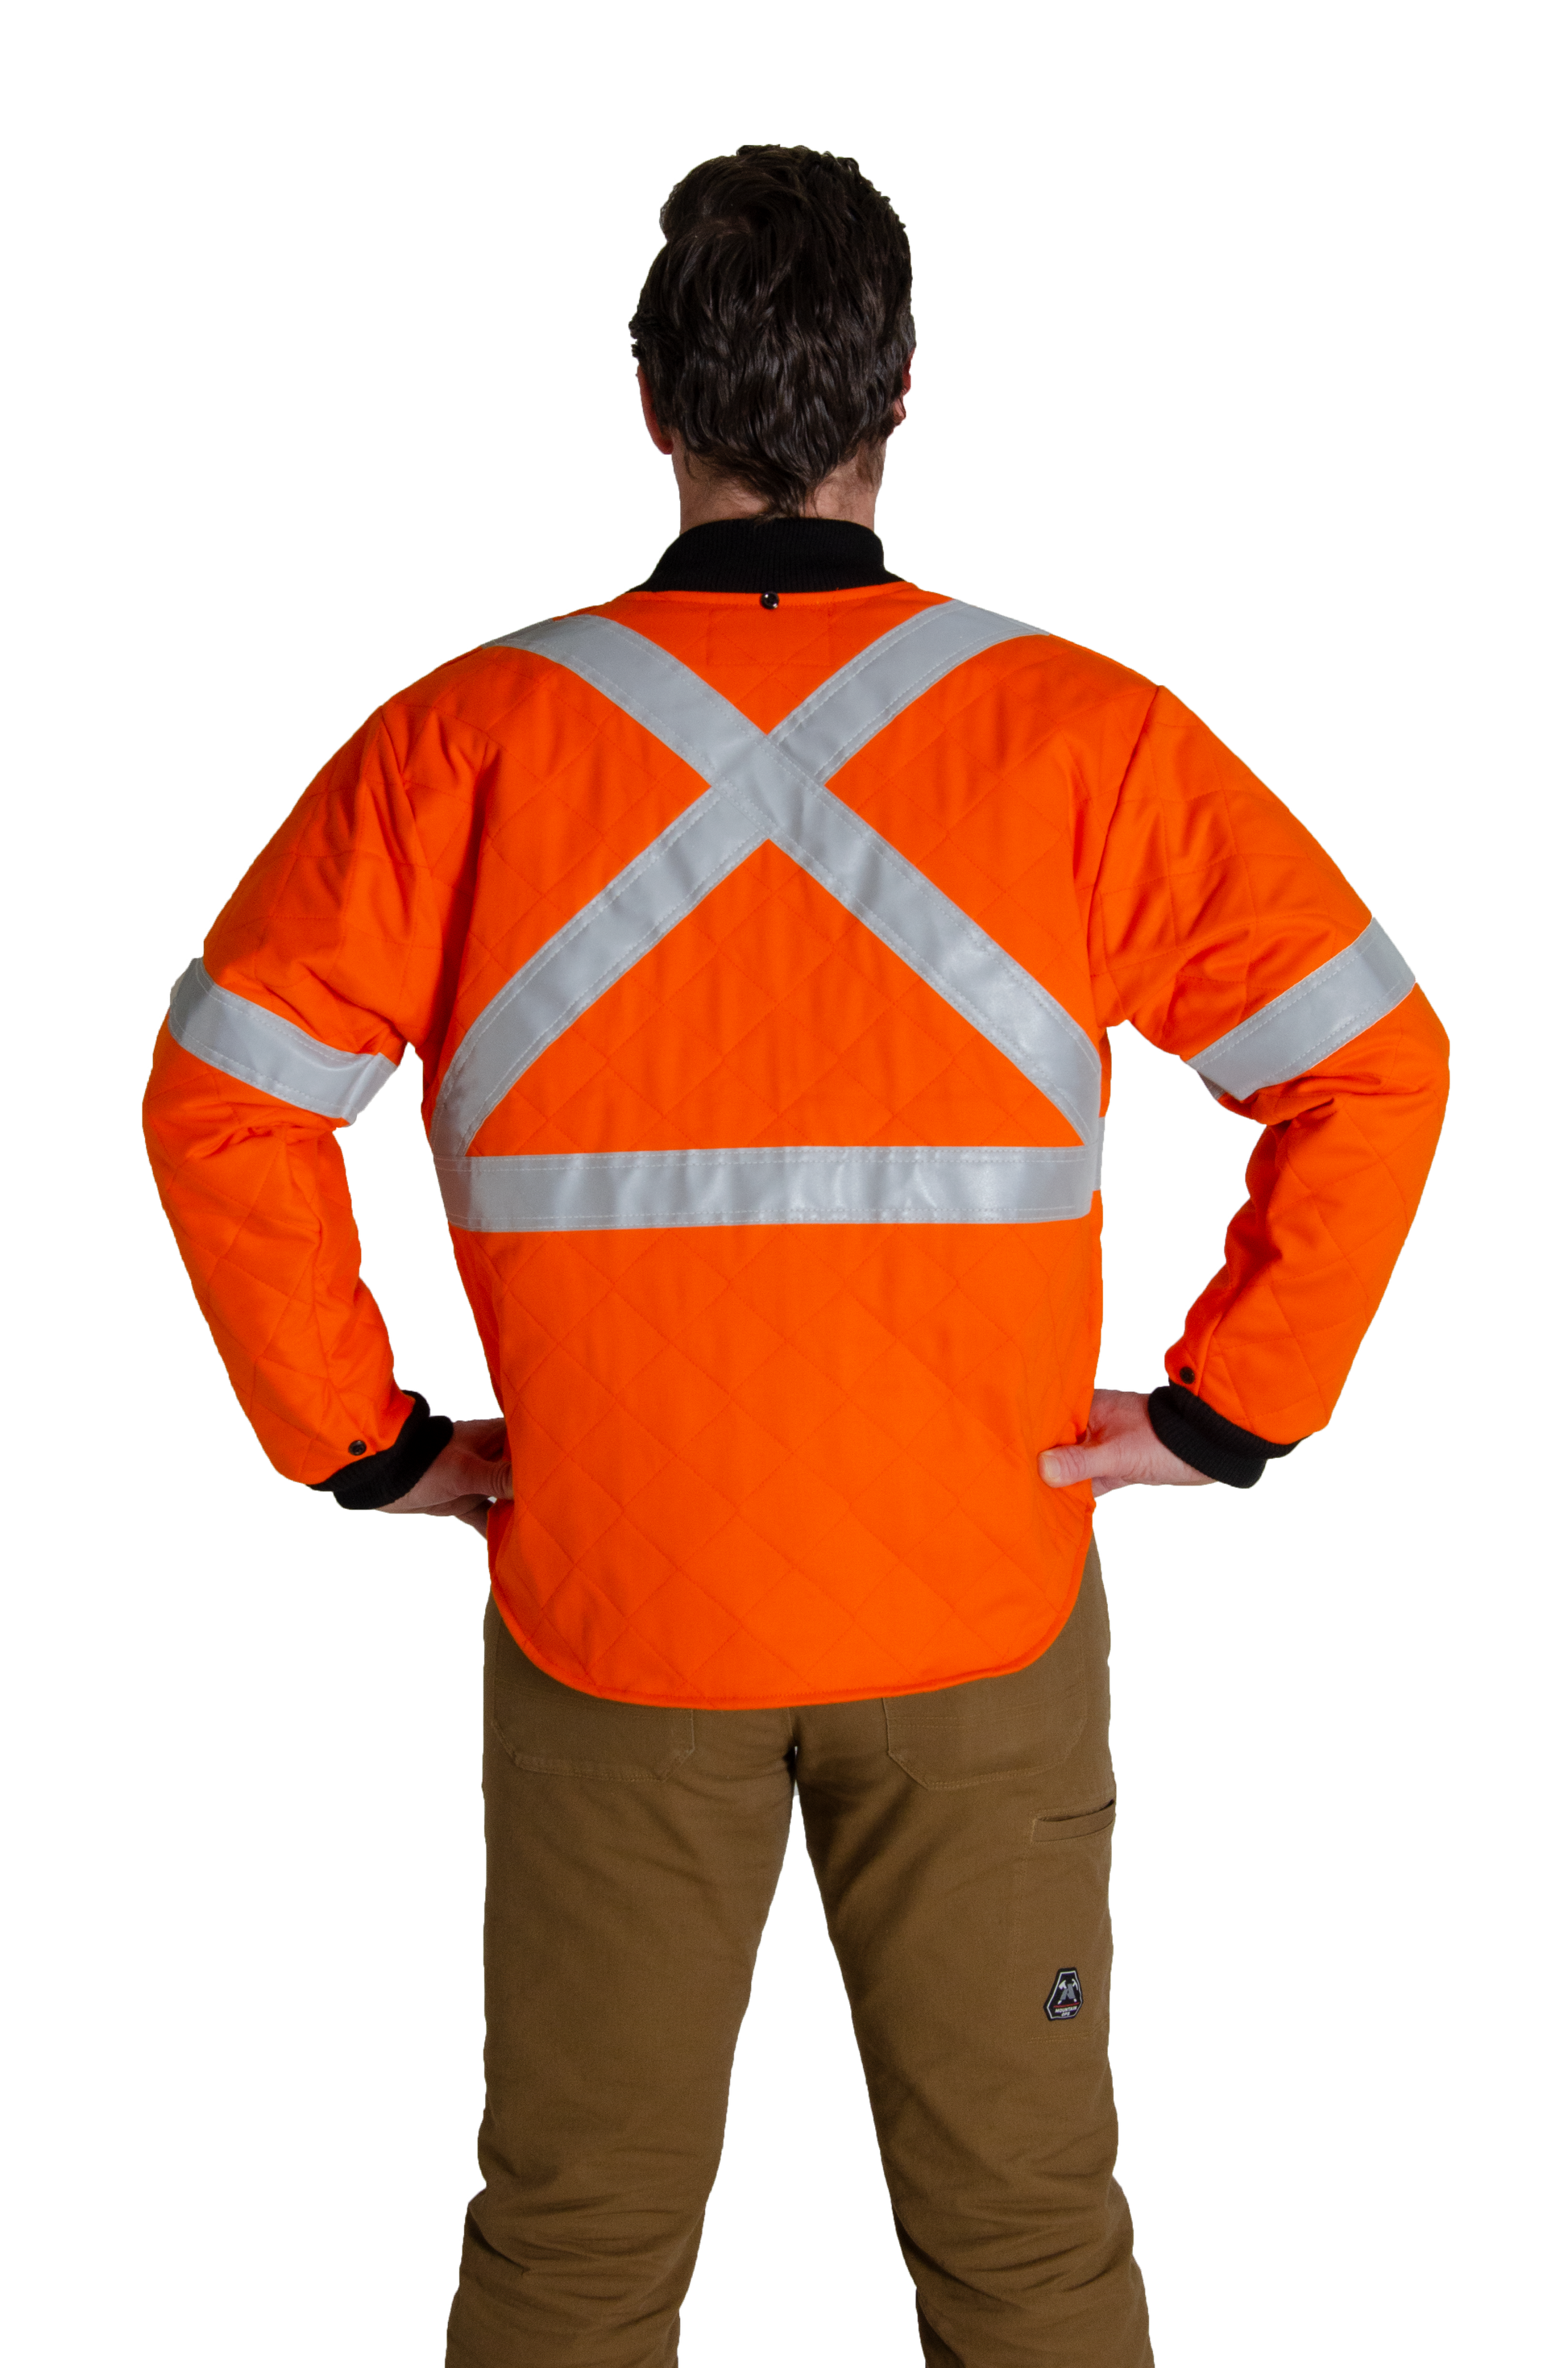 Image of MWG COTTON COMFORT FR/AR Freezer Jacket. Image displays the back of the freezer jacket, with X pattern and horizontal silver reflective tape. Image shows black collar and cuffs and bright orange arms and torso. FR Freezer Jacket is made with MWG COTTON COMFORT, a flame-resistant (FR) cotton.